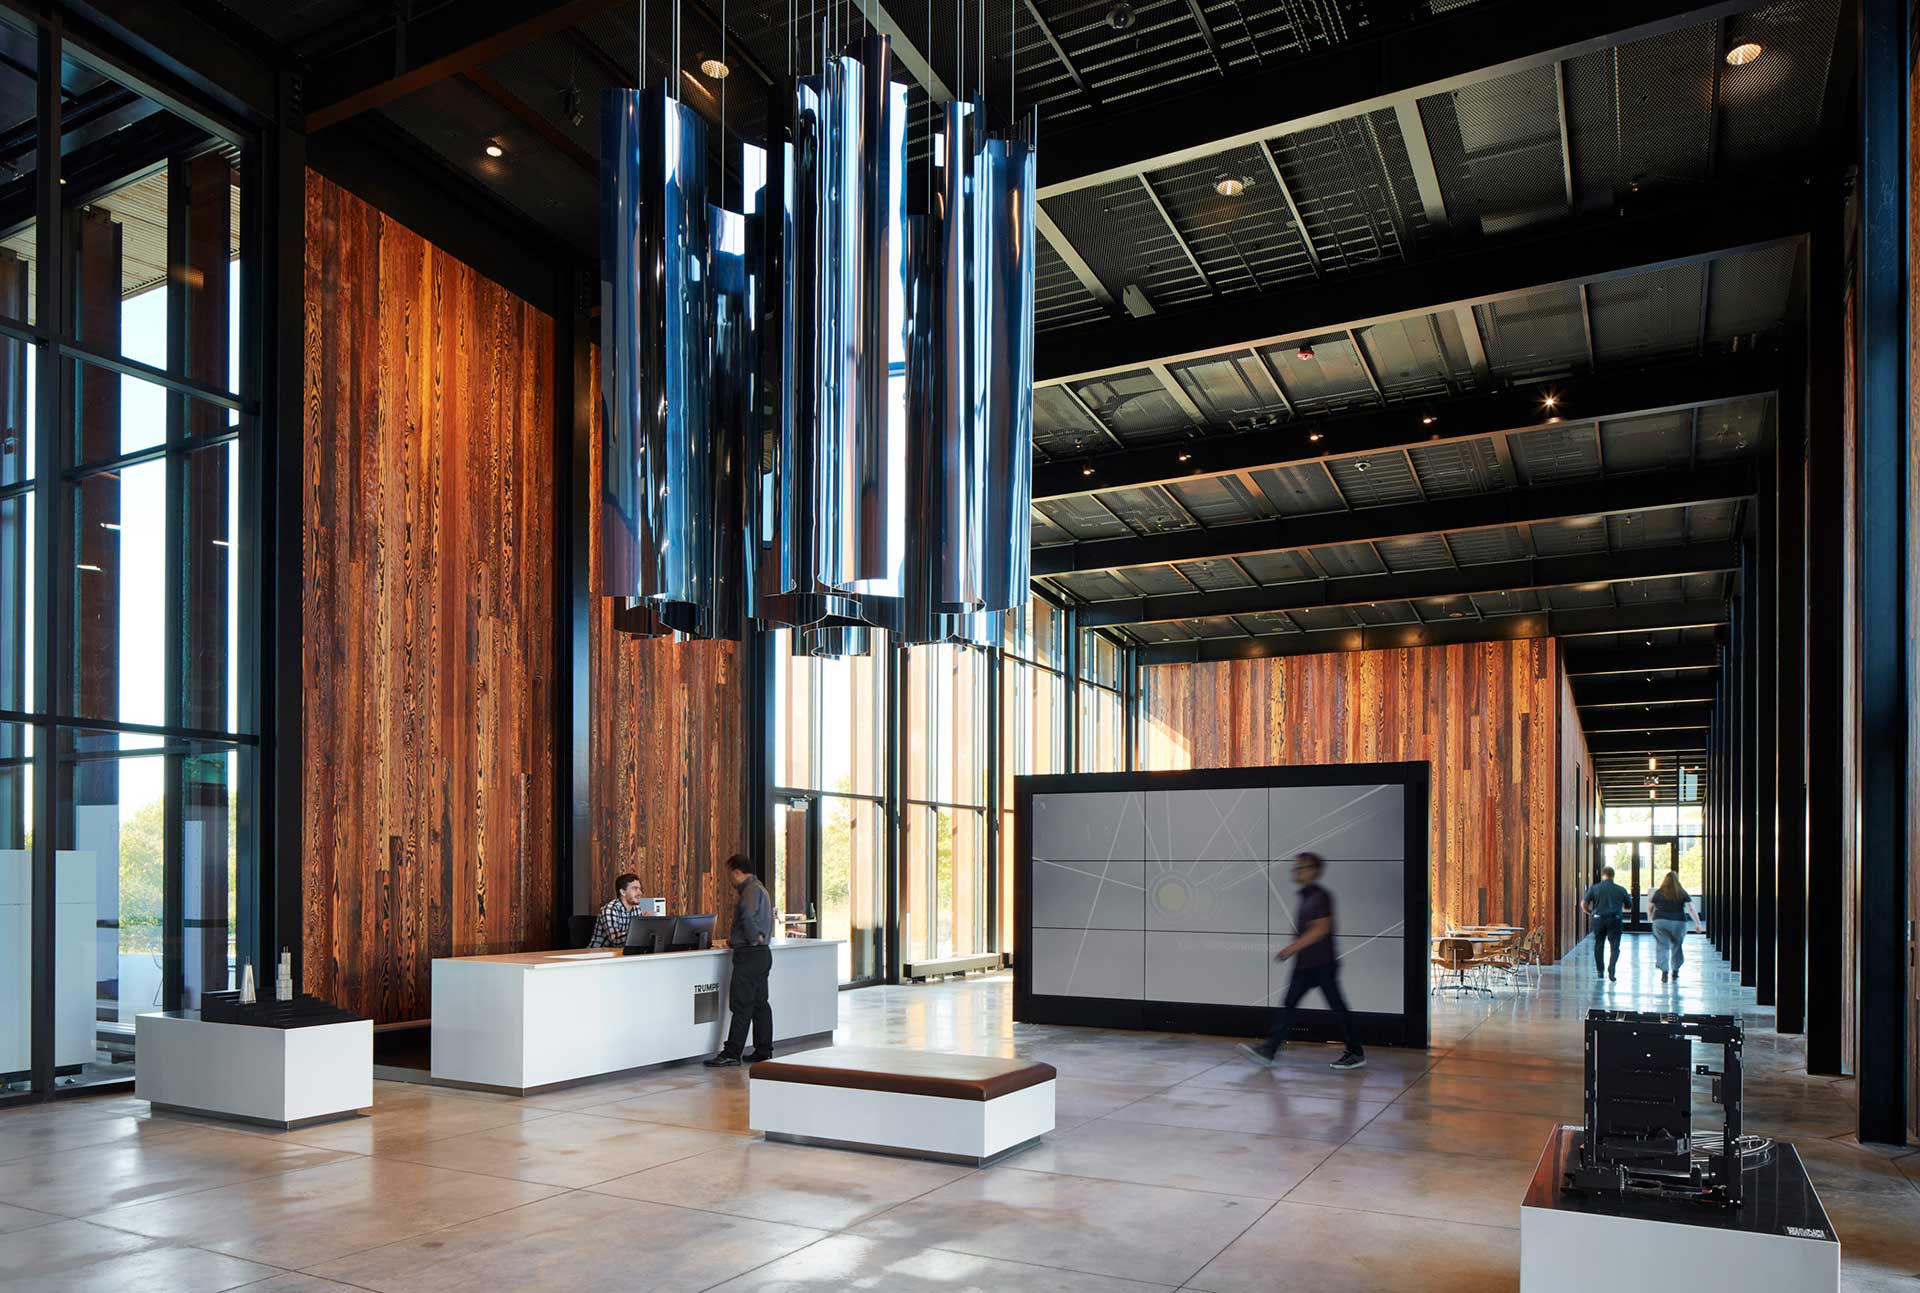 Lobby at Trumpf Smart Factory office and showroom facility